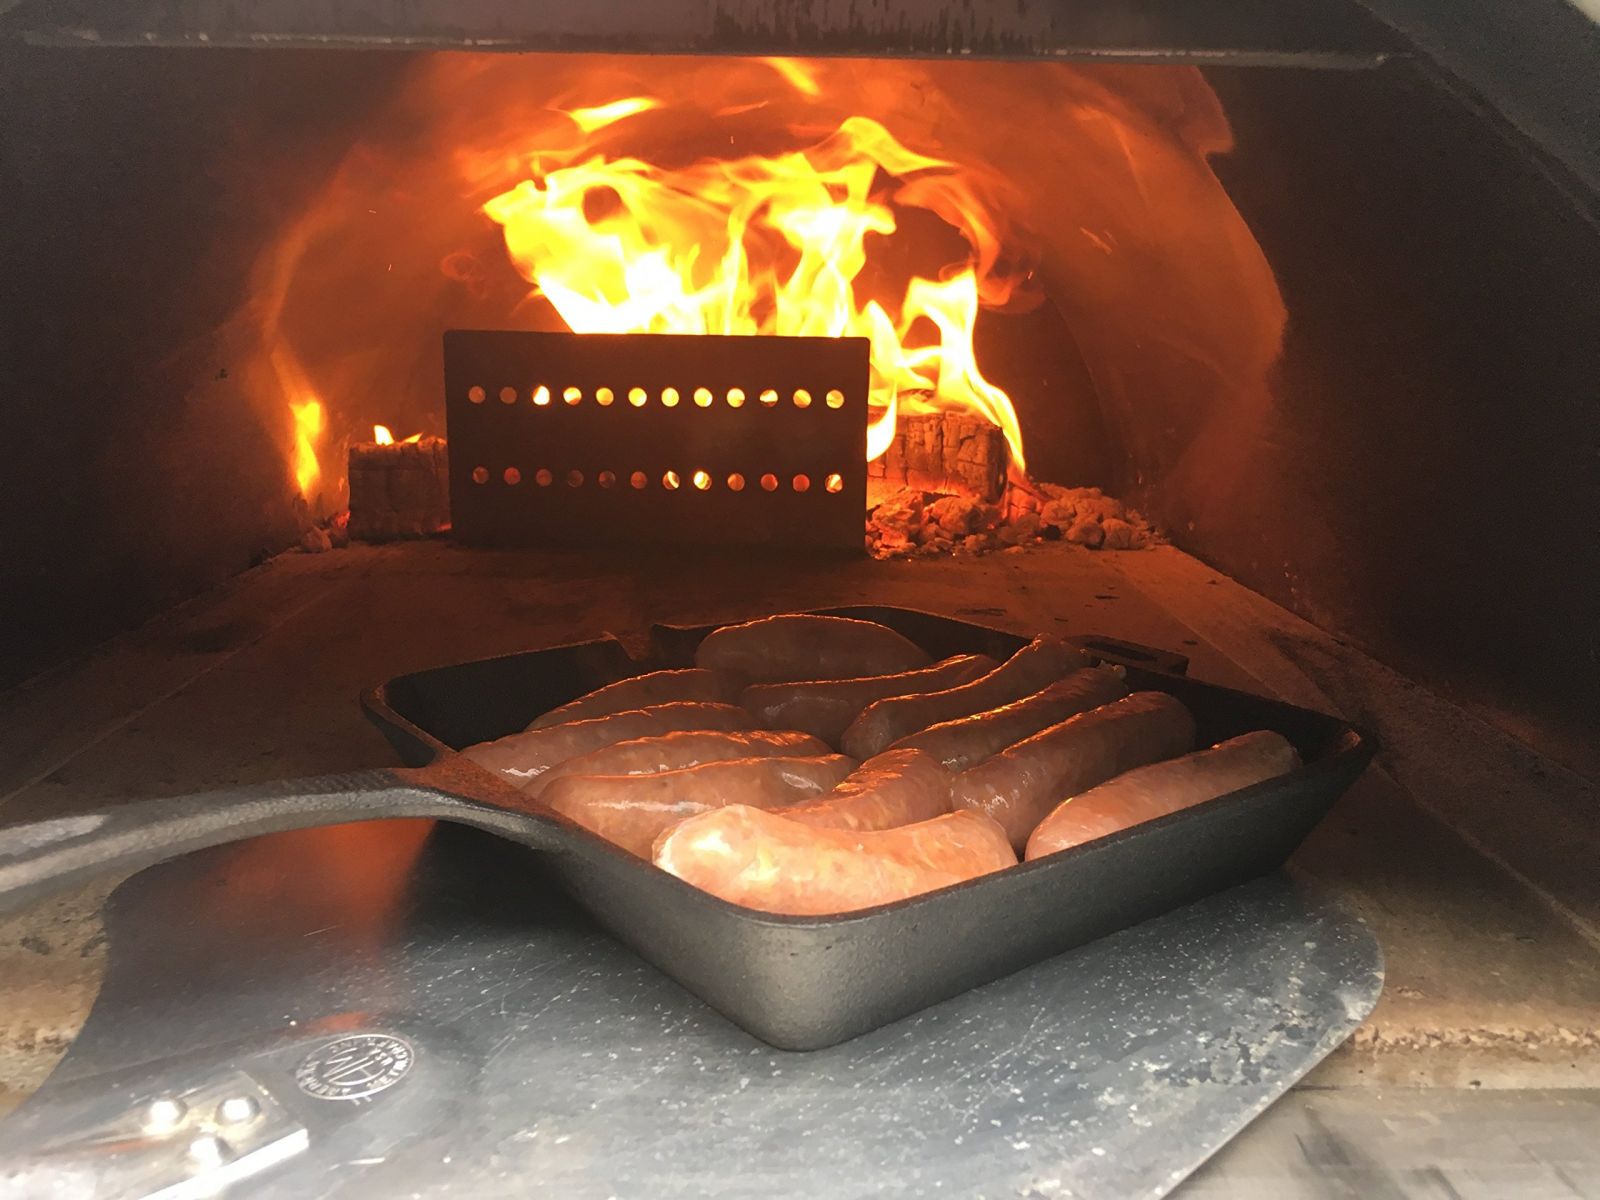 This image shows a burning fire in a pizza oven that is help back by a Stainless Steel Log Holder Flame Shield